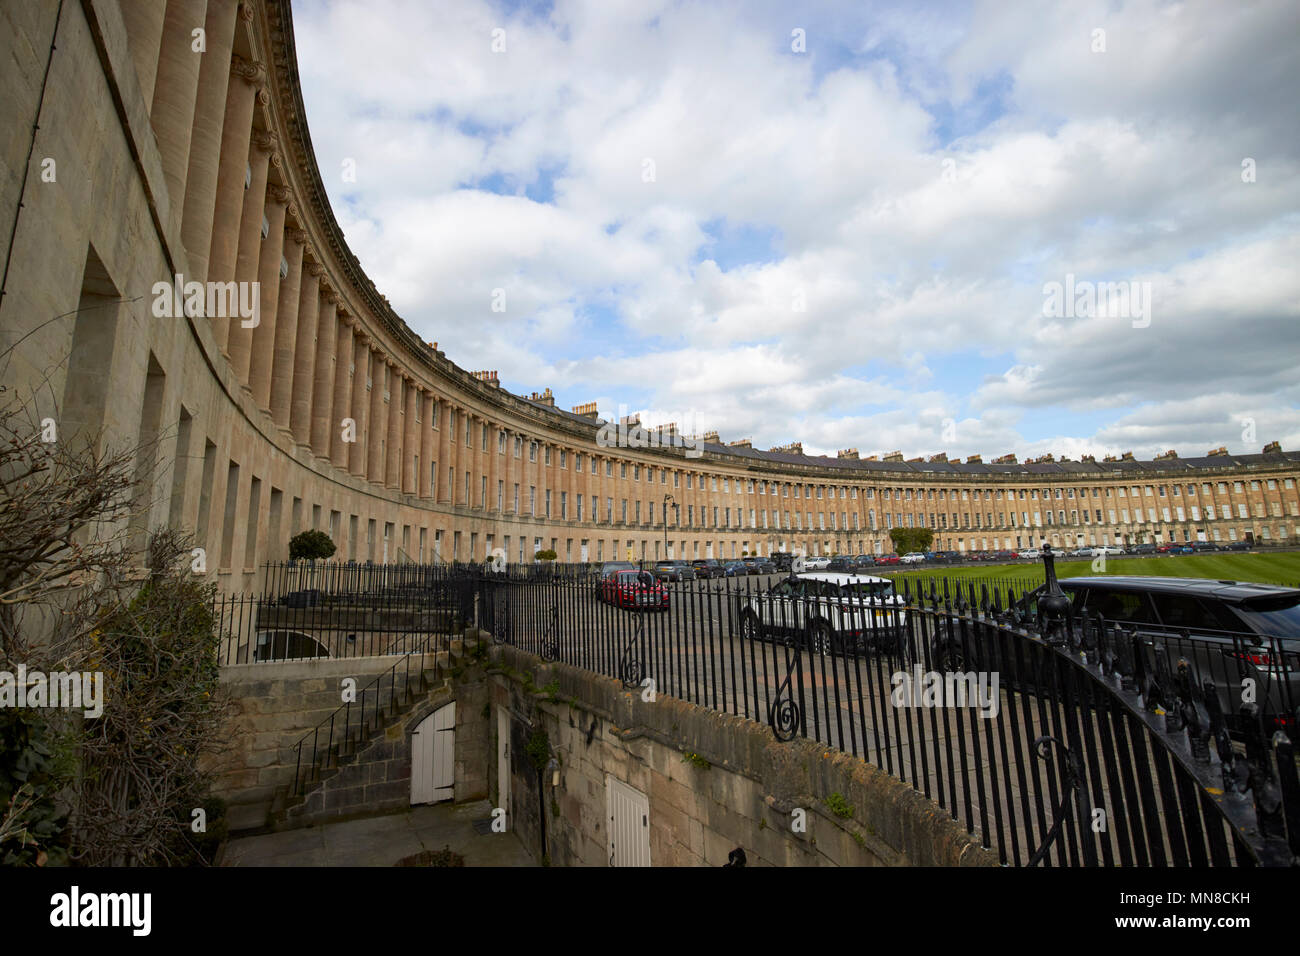 view of Royal Crescent residential road georgian houses Bath showing railings and steps down to basements England UK Stock Photo